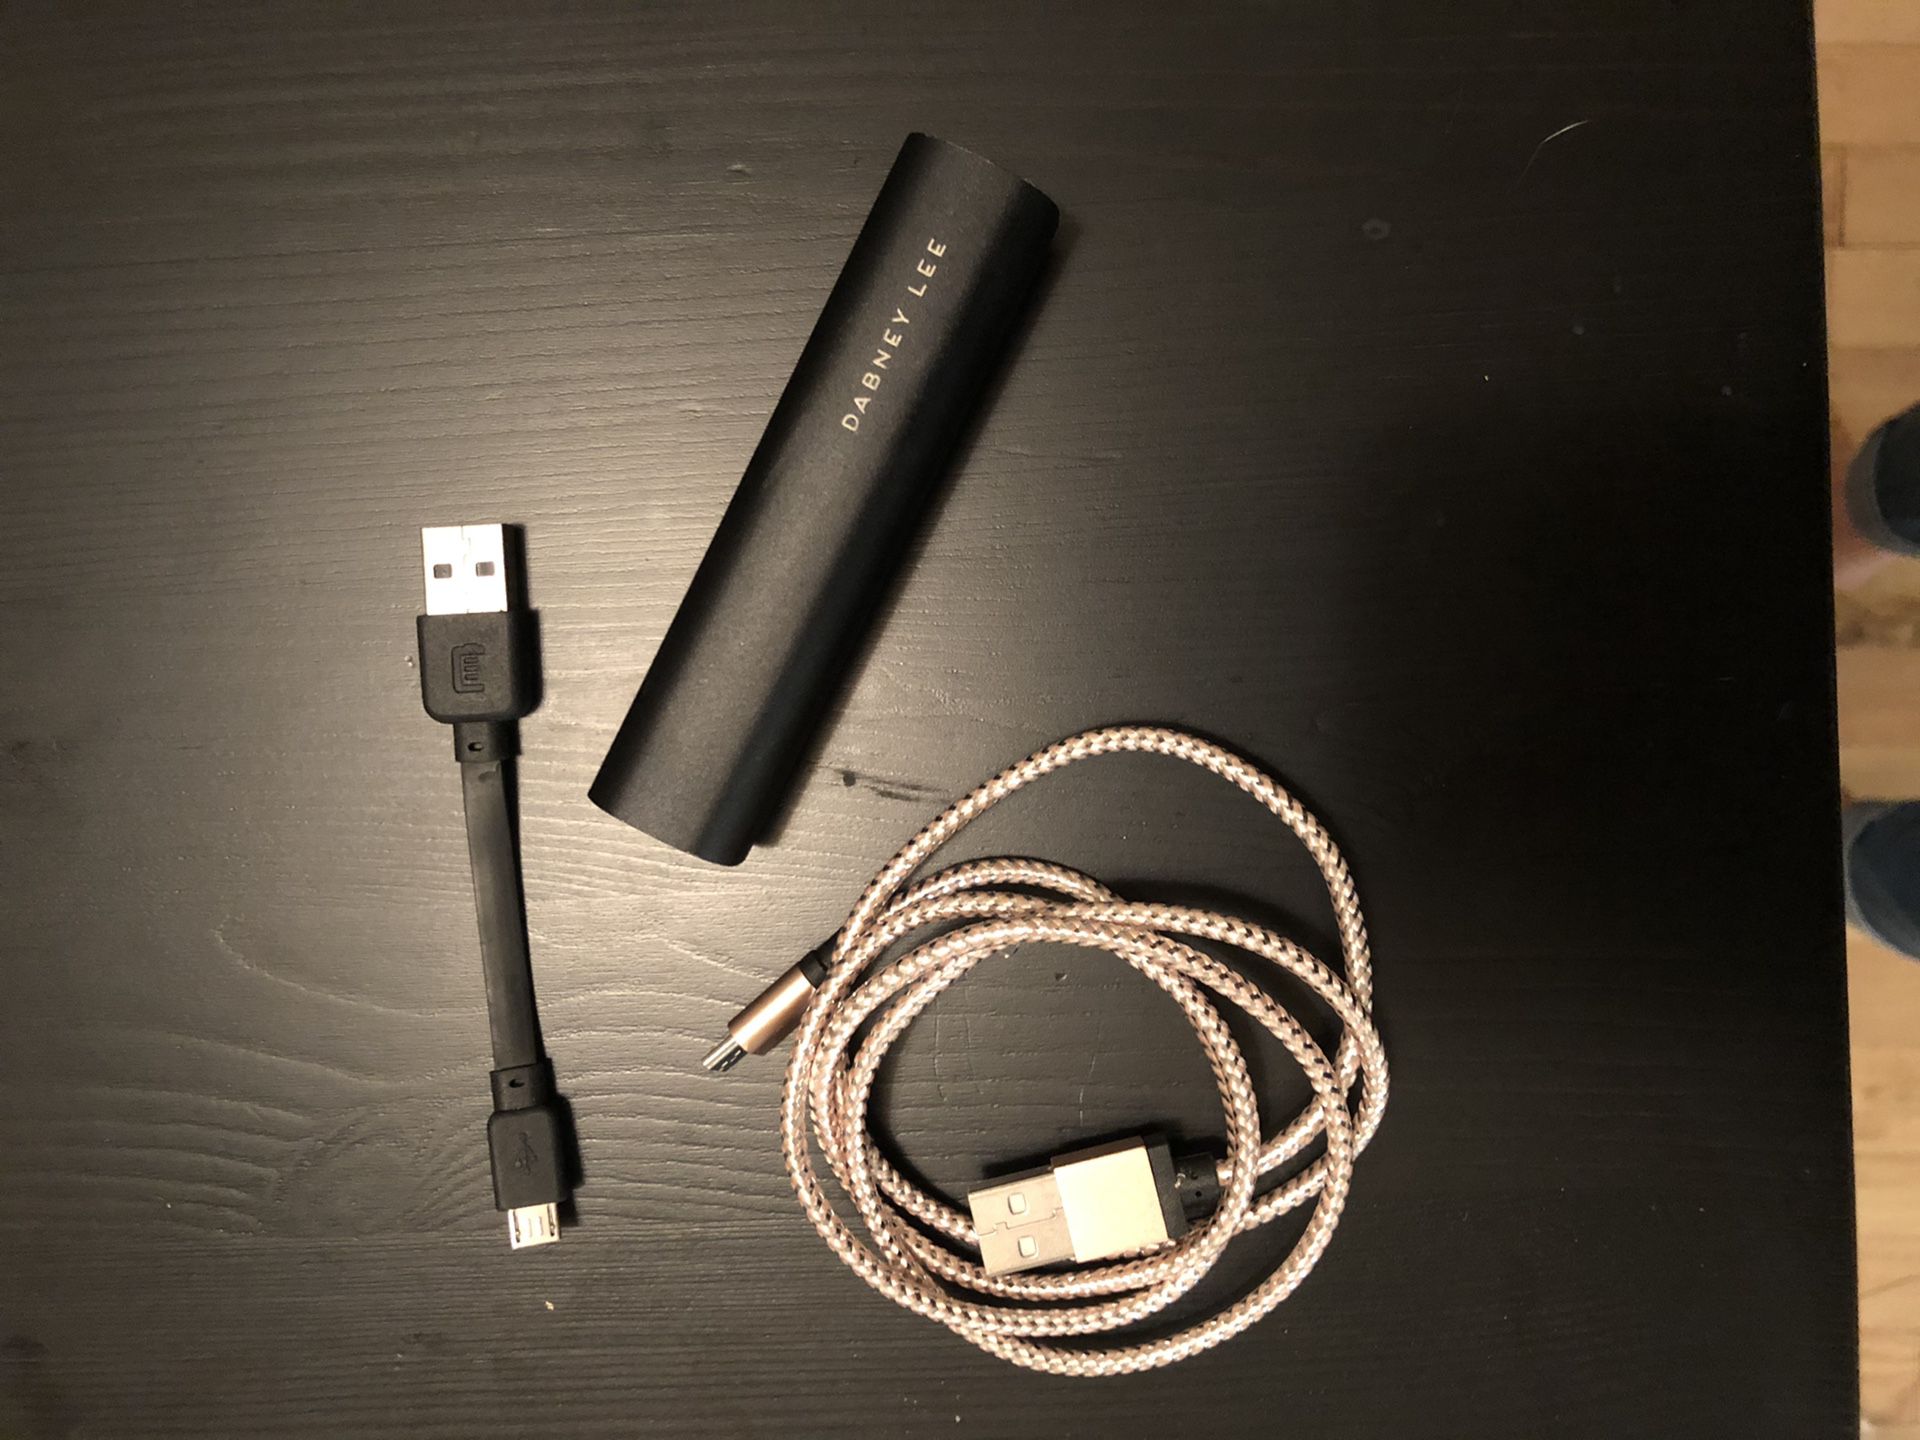 External battery with charging cables